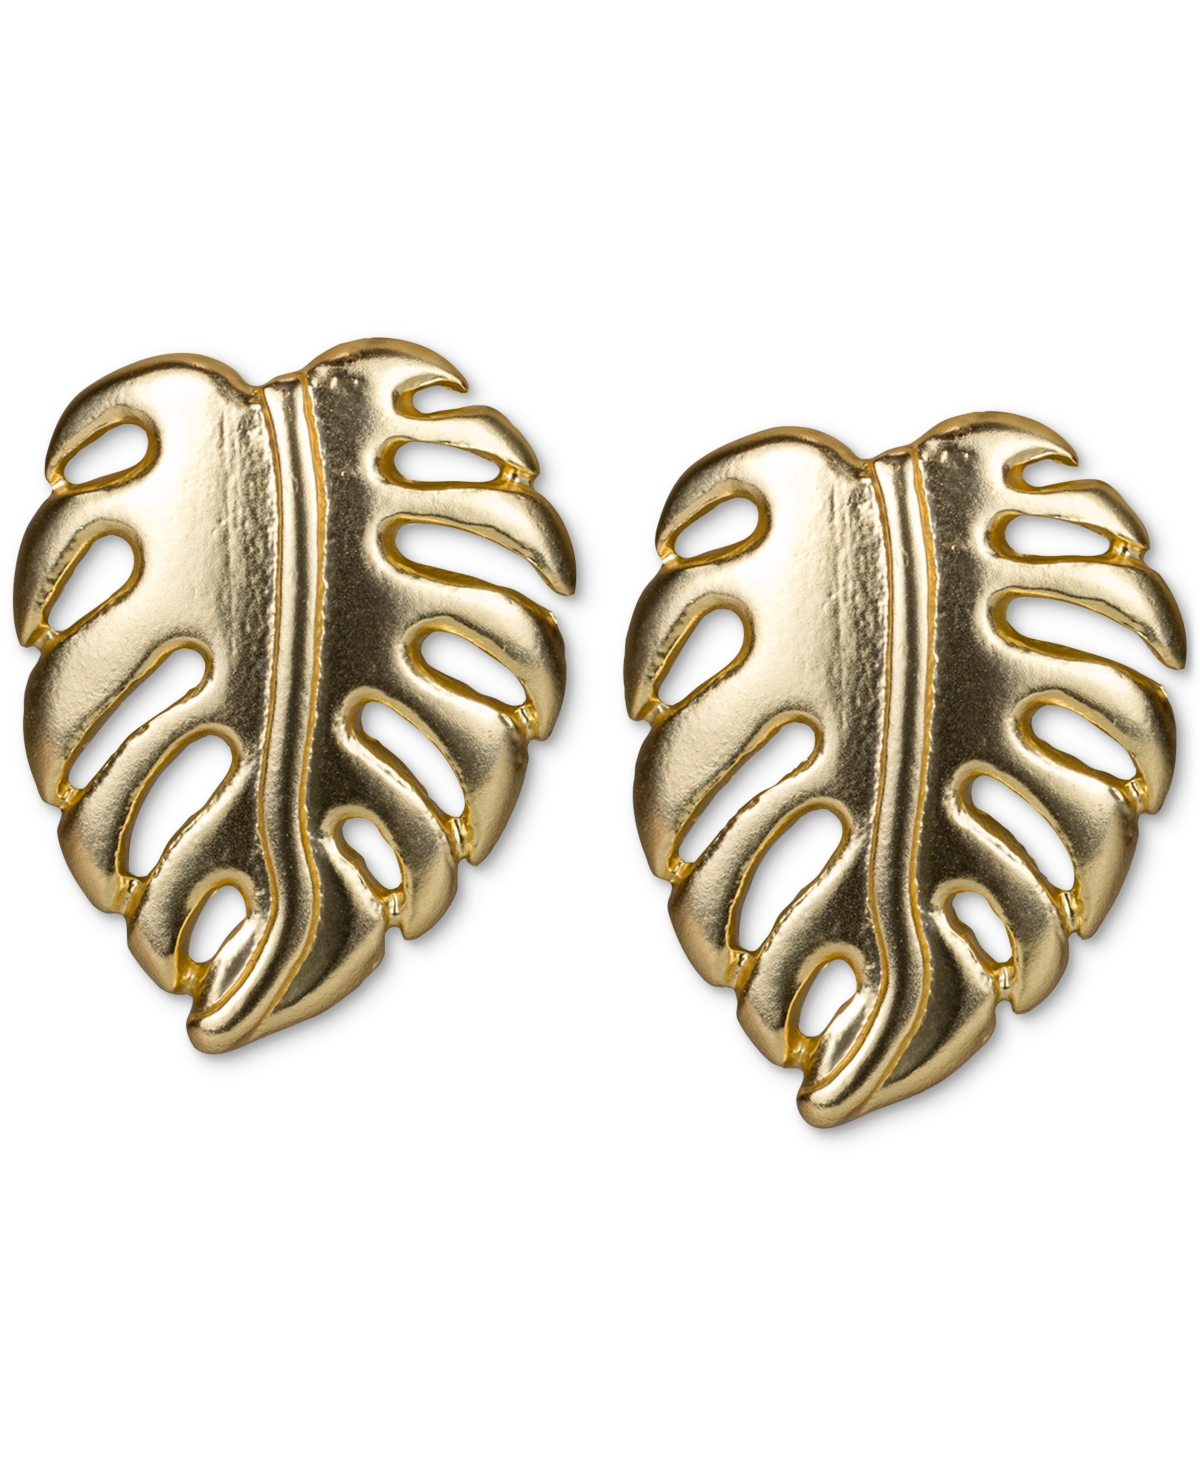 Gold-Tone Palm Leaf Button Earrings - Egyptian G